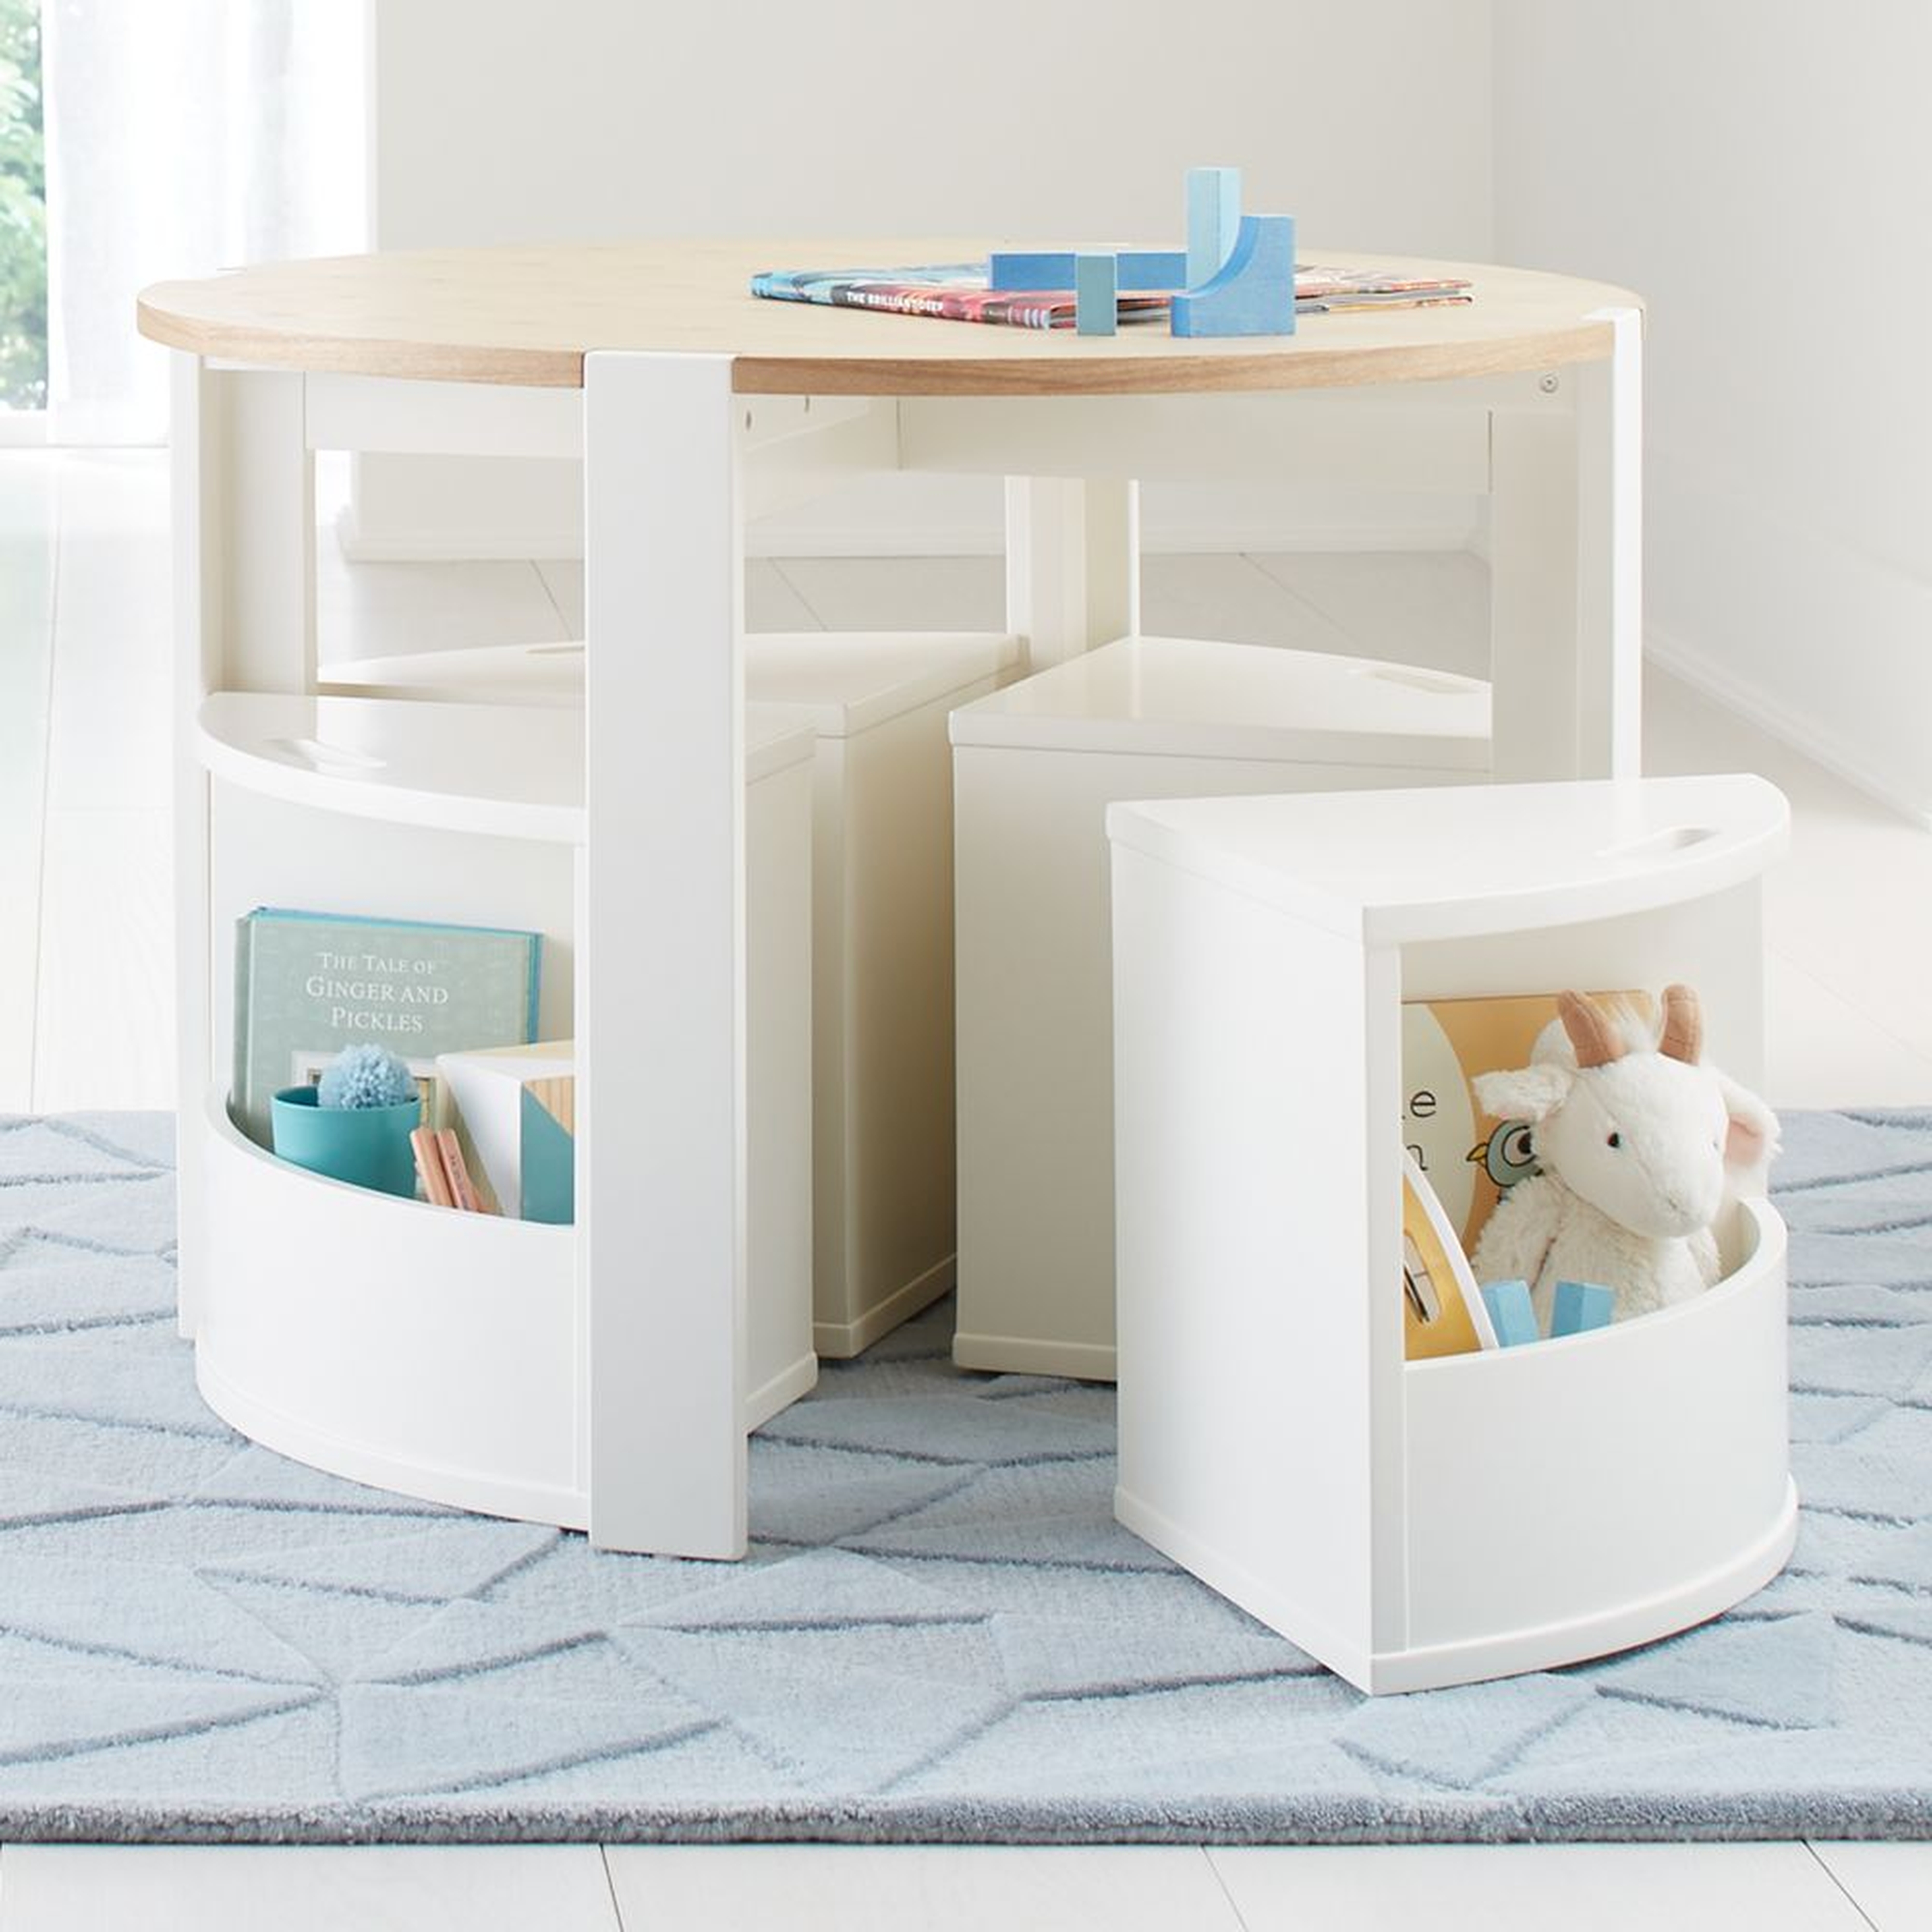 Nesting White and Natural Wood Kids Play Table and Chairs with Storage Set - Crate and Barrel